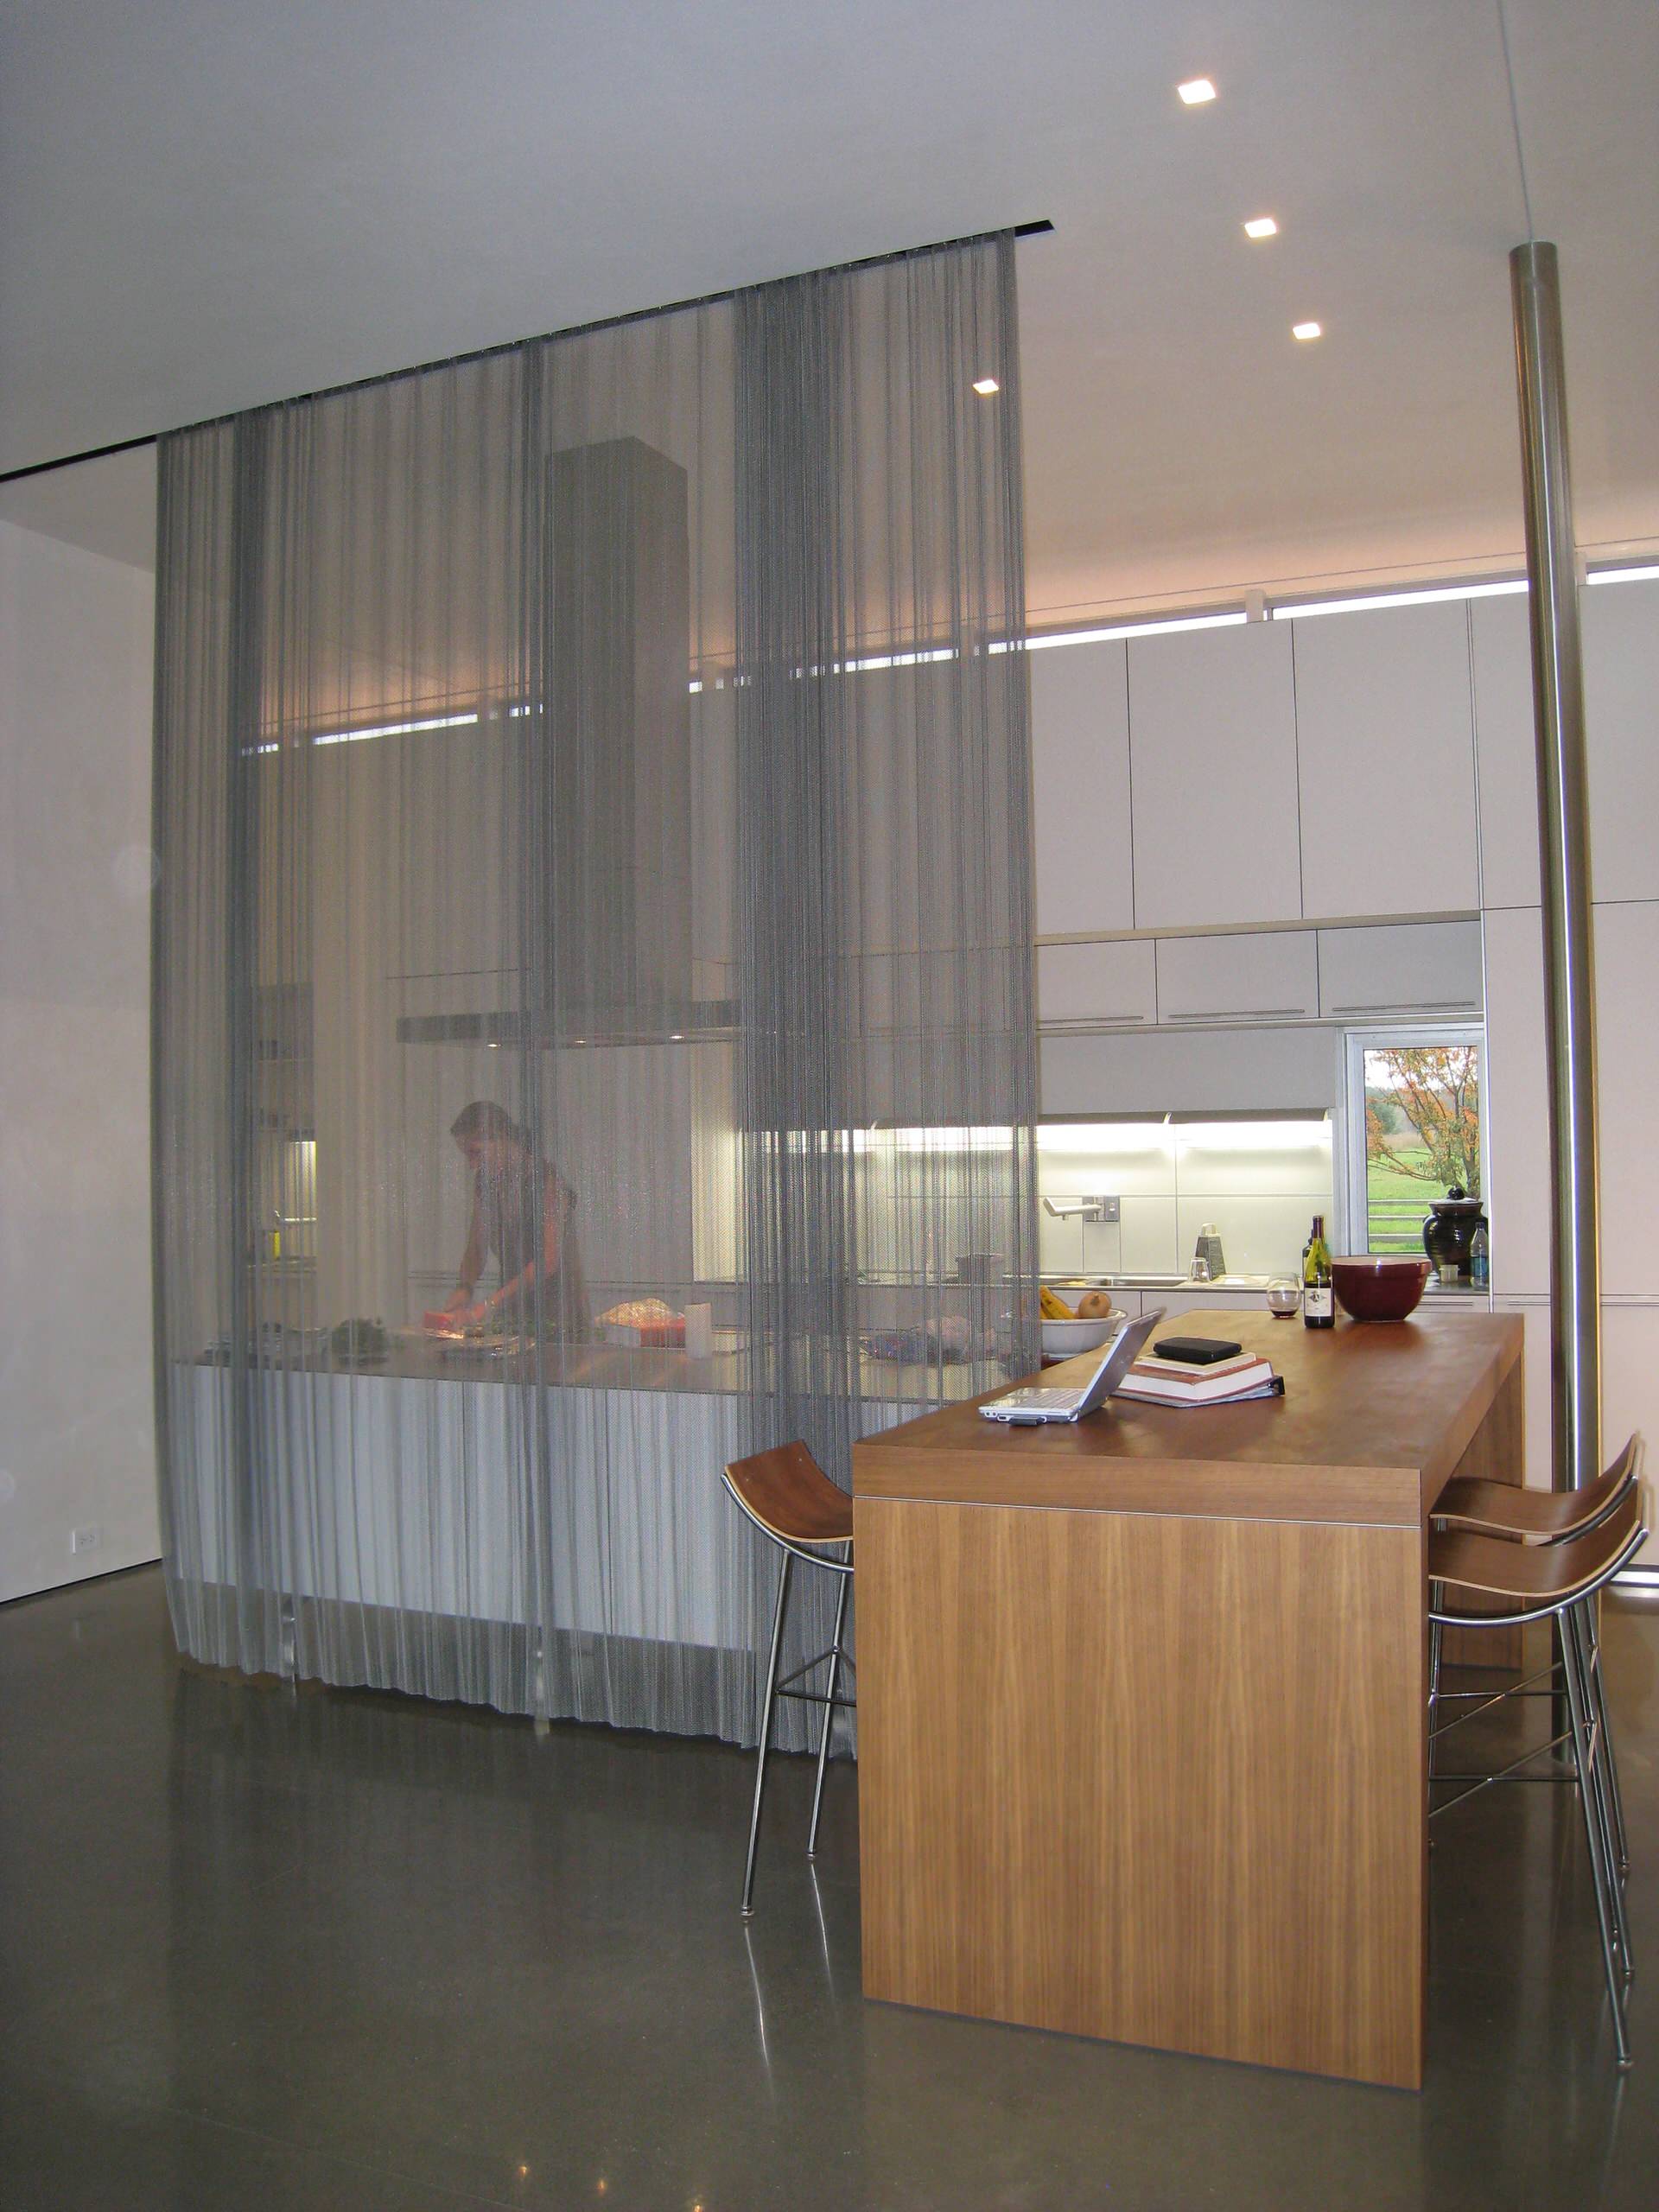 A large curtain divider in a small kitchen.